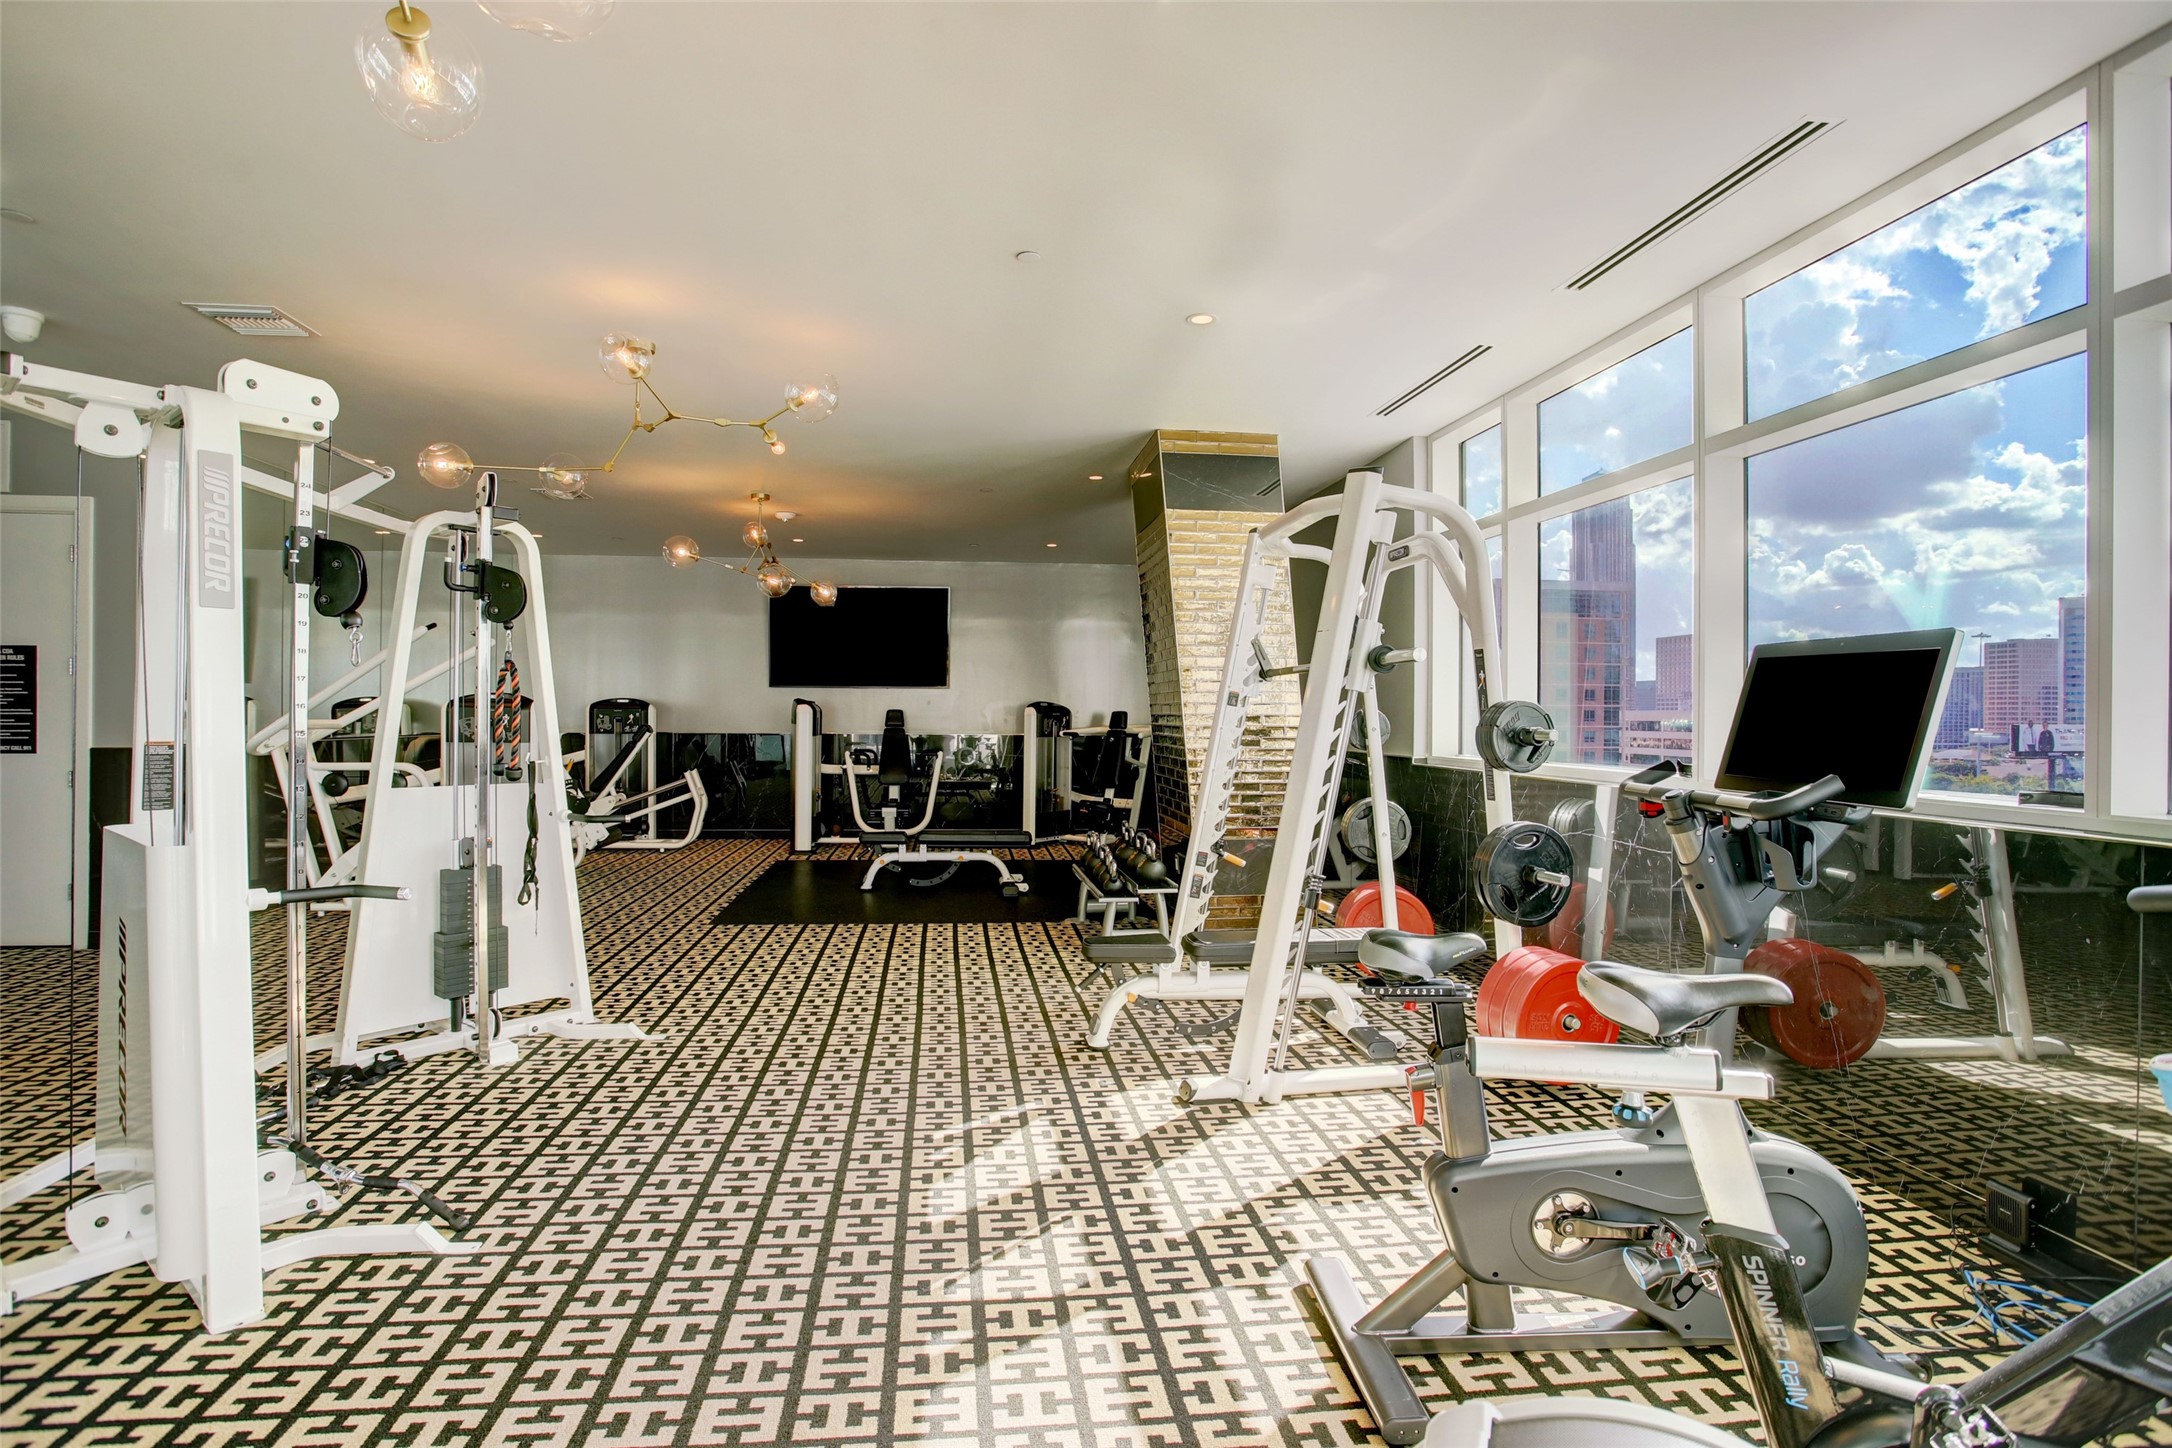 The fully-equipped fitness center has everything you need along with an amazing view